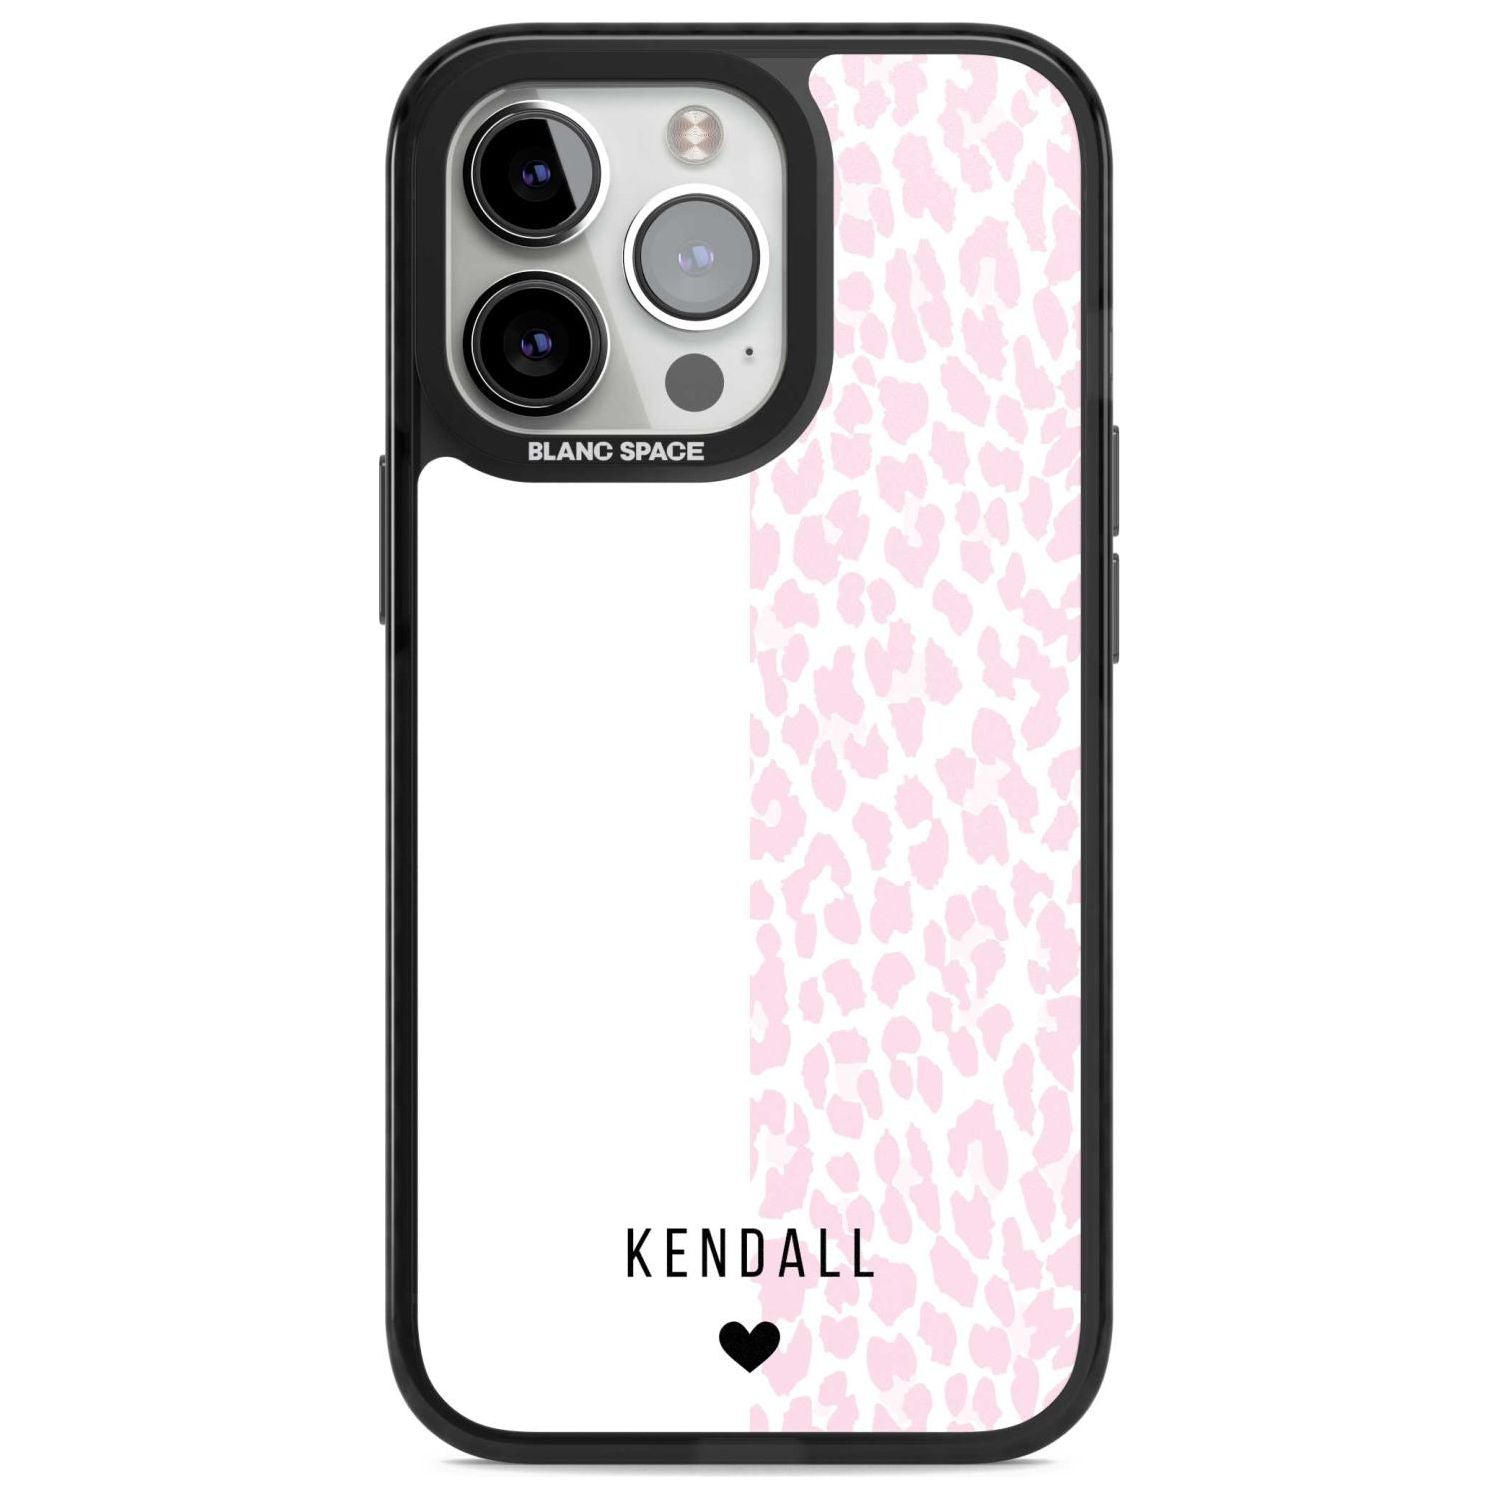 Personalised Pink & White Leopard Spots Custom Phone Case iPhone 15 Pro Max / Magsafe Black Impact Case,iPhone 15 Pro / Magsafe Black Impact Case,iPhone 14 Pro Max / Magsafe Black Impact Case,iPhone 14 Pro / Magsafe Black Impact Case,iPhone 13 Pro / Magsafe Black Impact Case Blanc Space